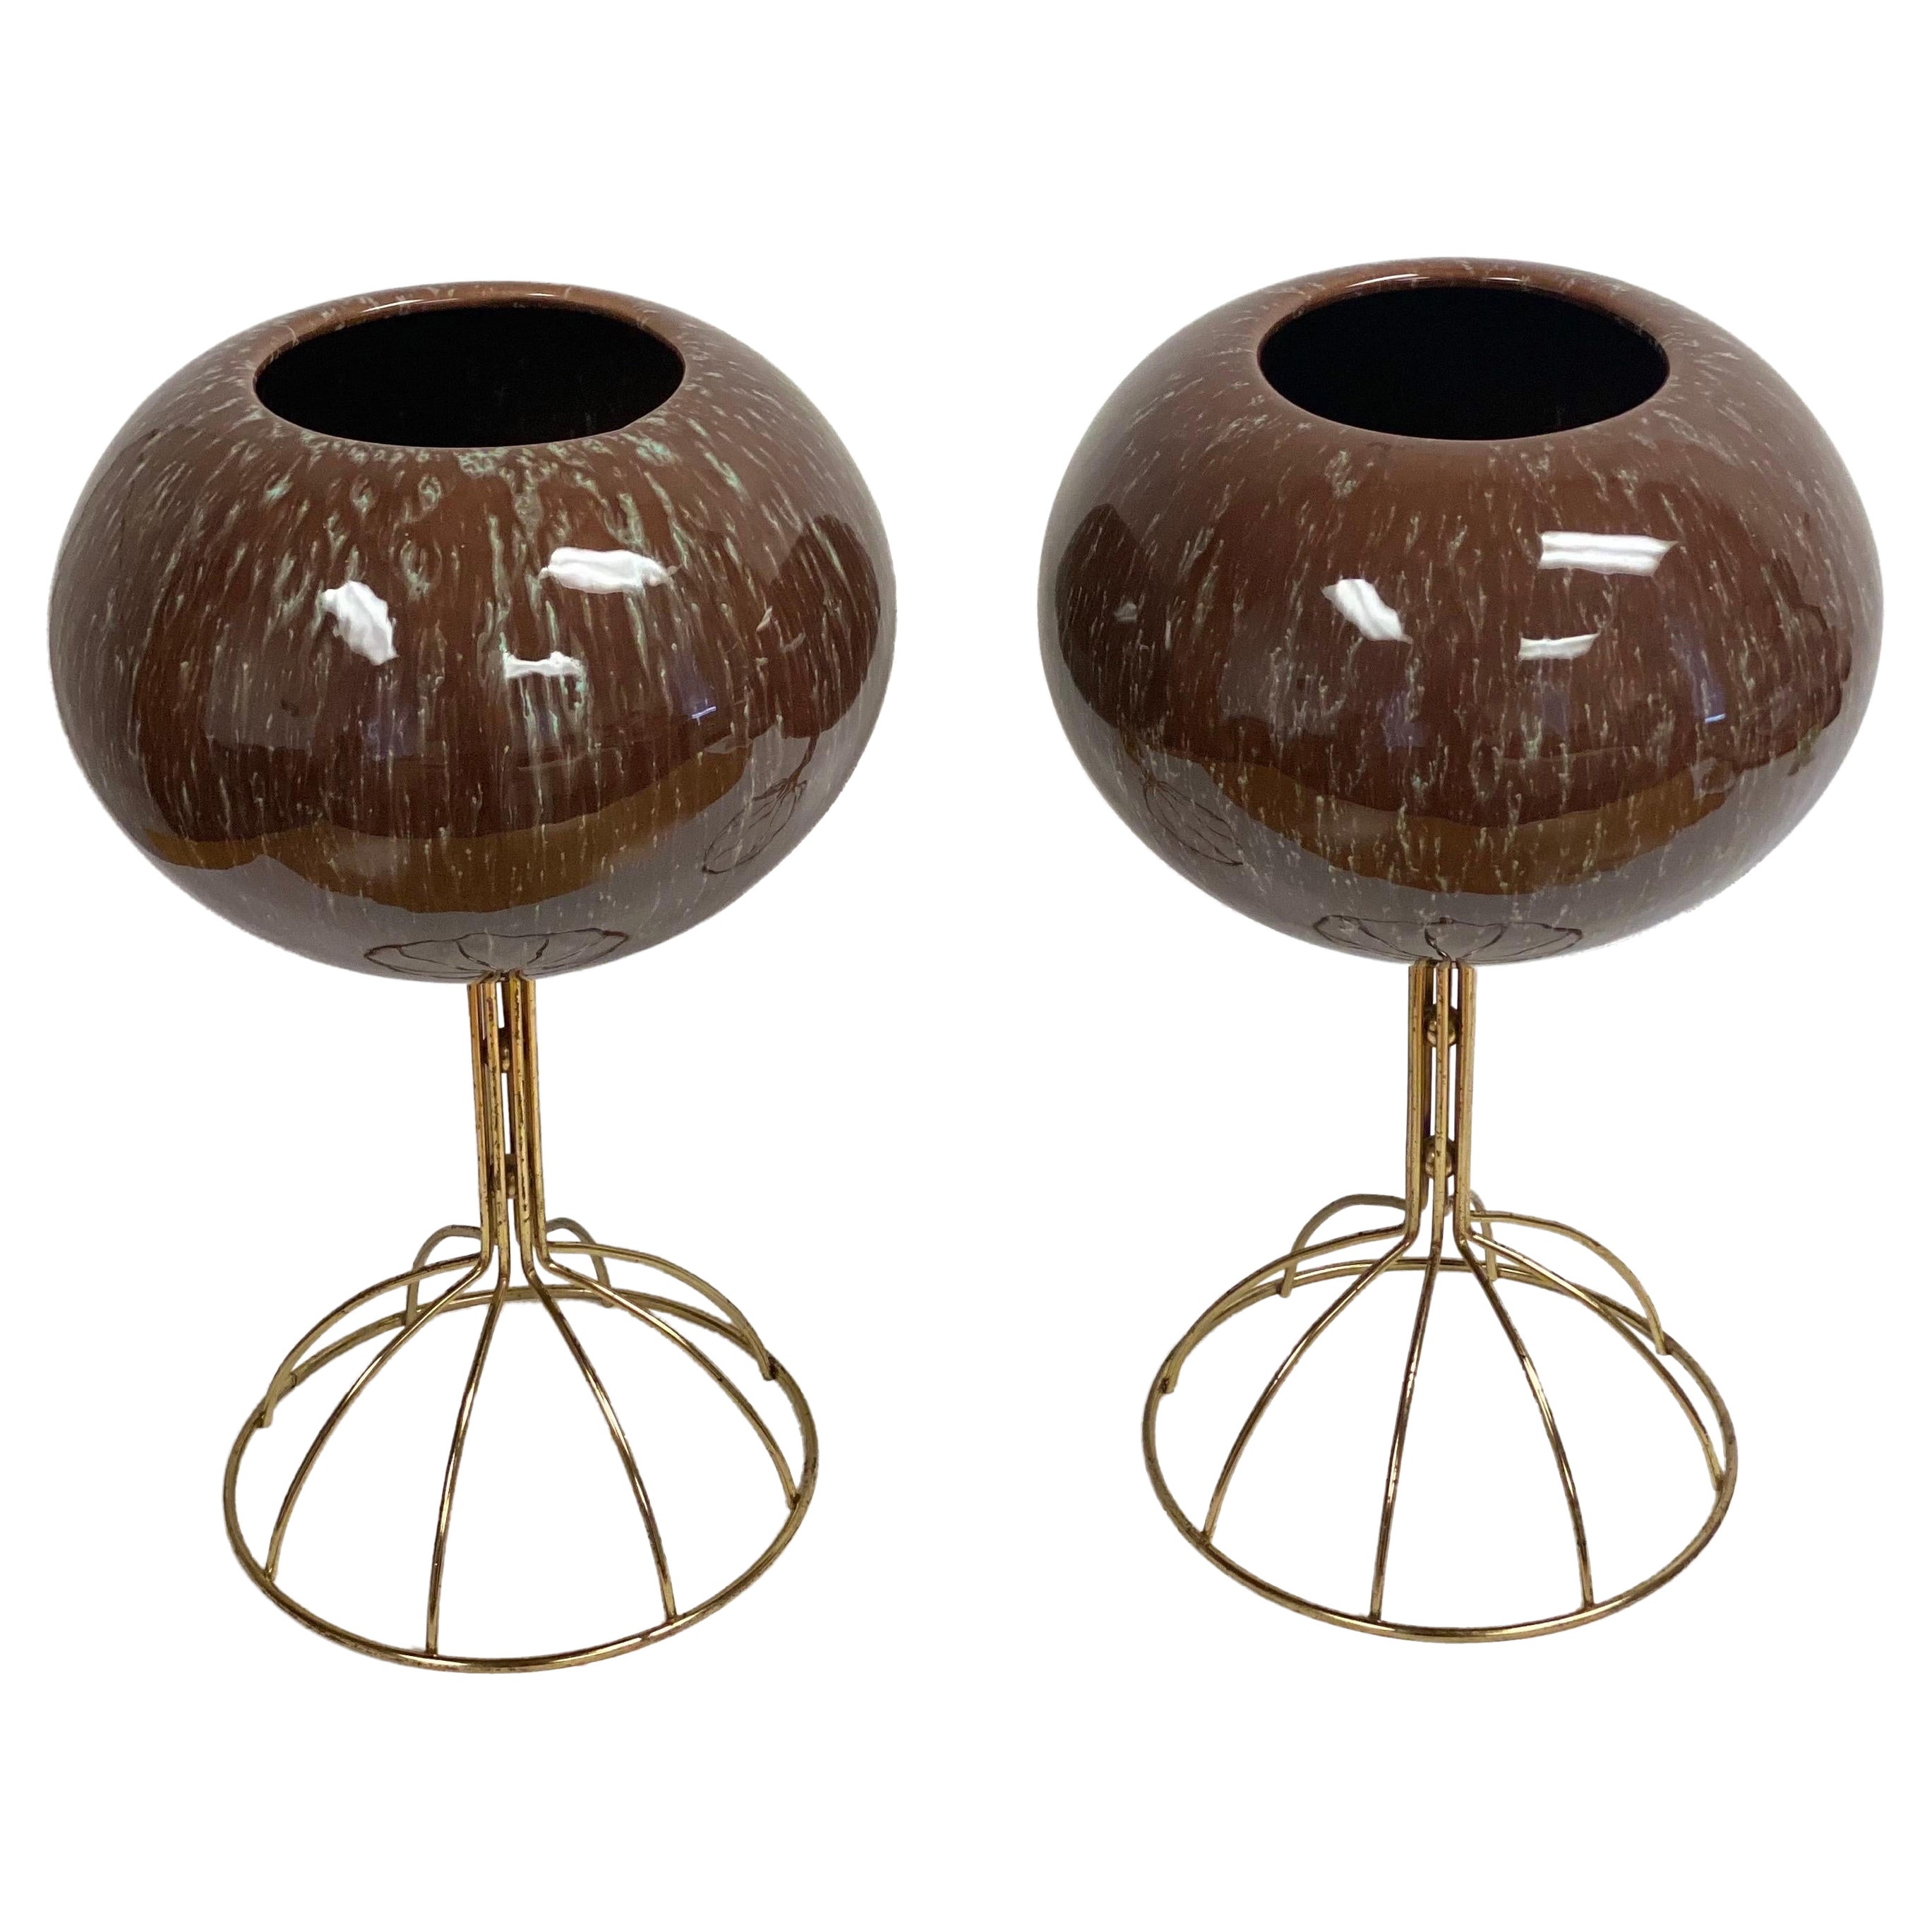 Vintage Italian Brown Ceramic Sphere Planters with Brass Stands, a Pair